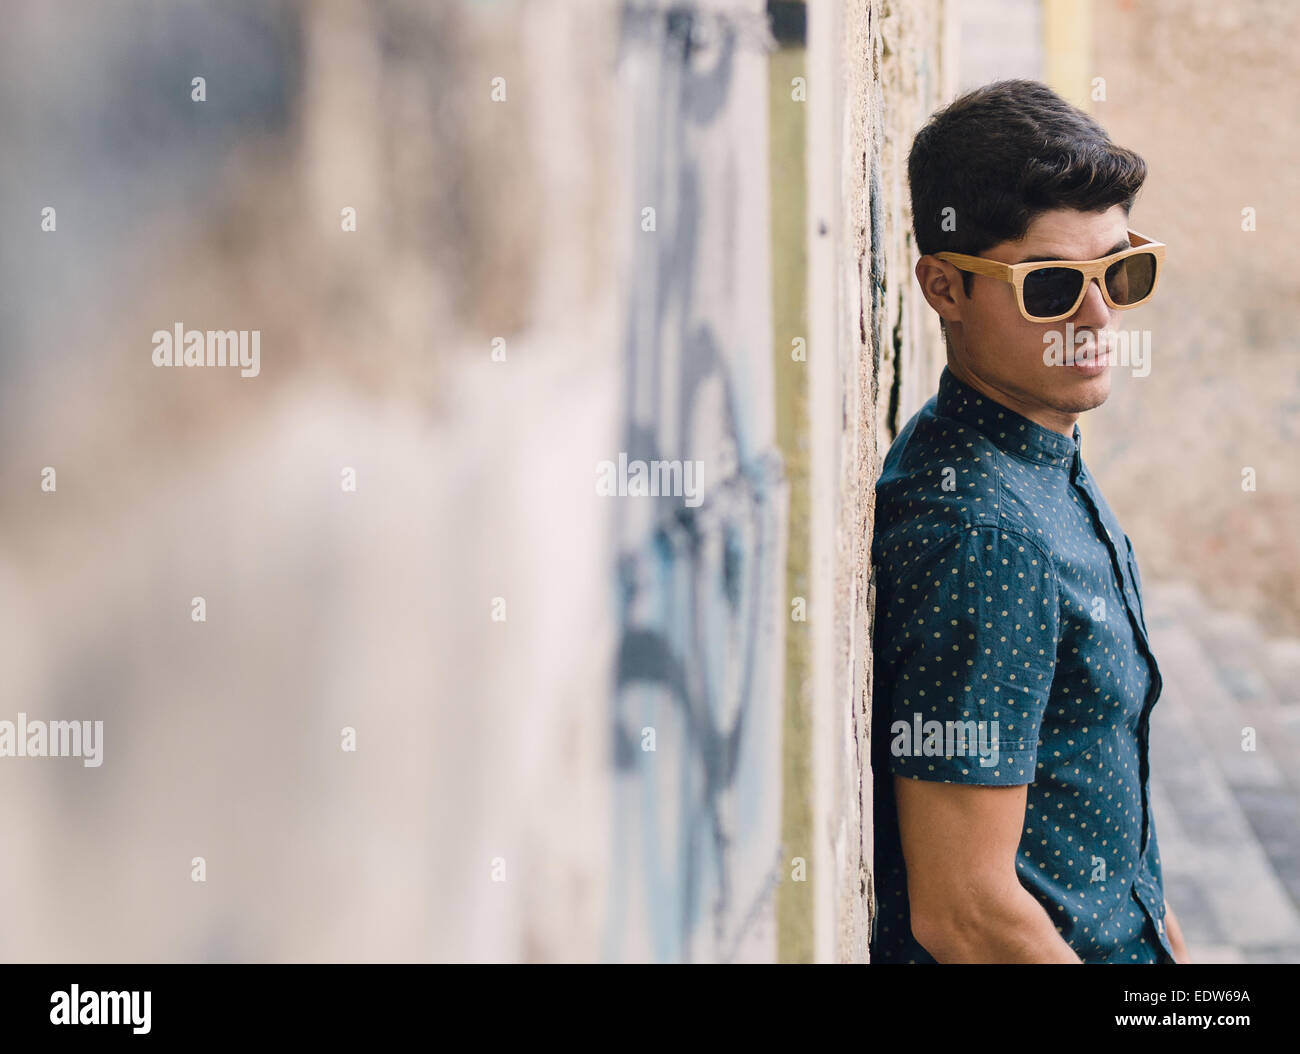 Fashionable man portrait over ruinous wall background outdoors Stock Photo